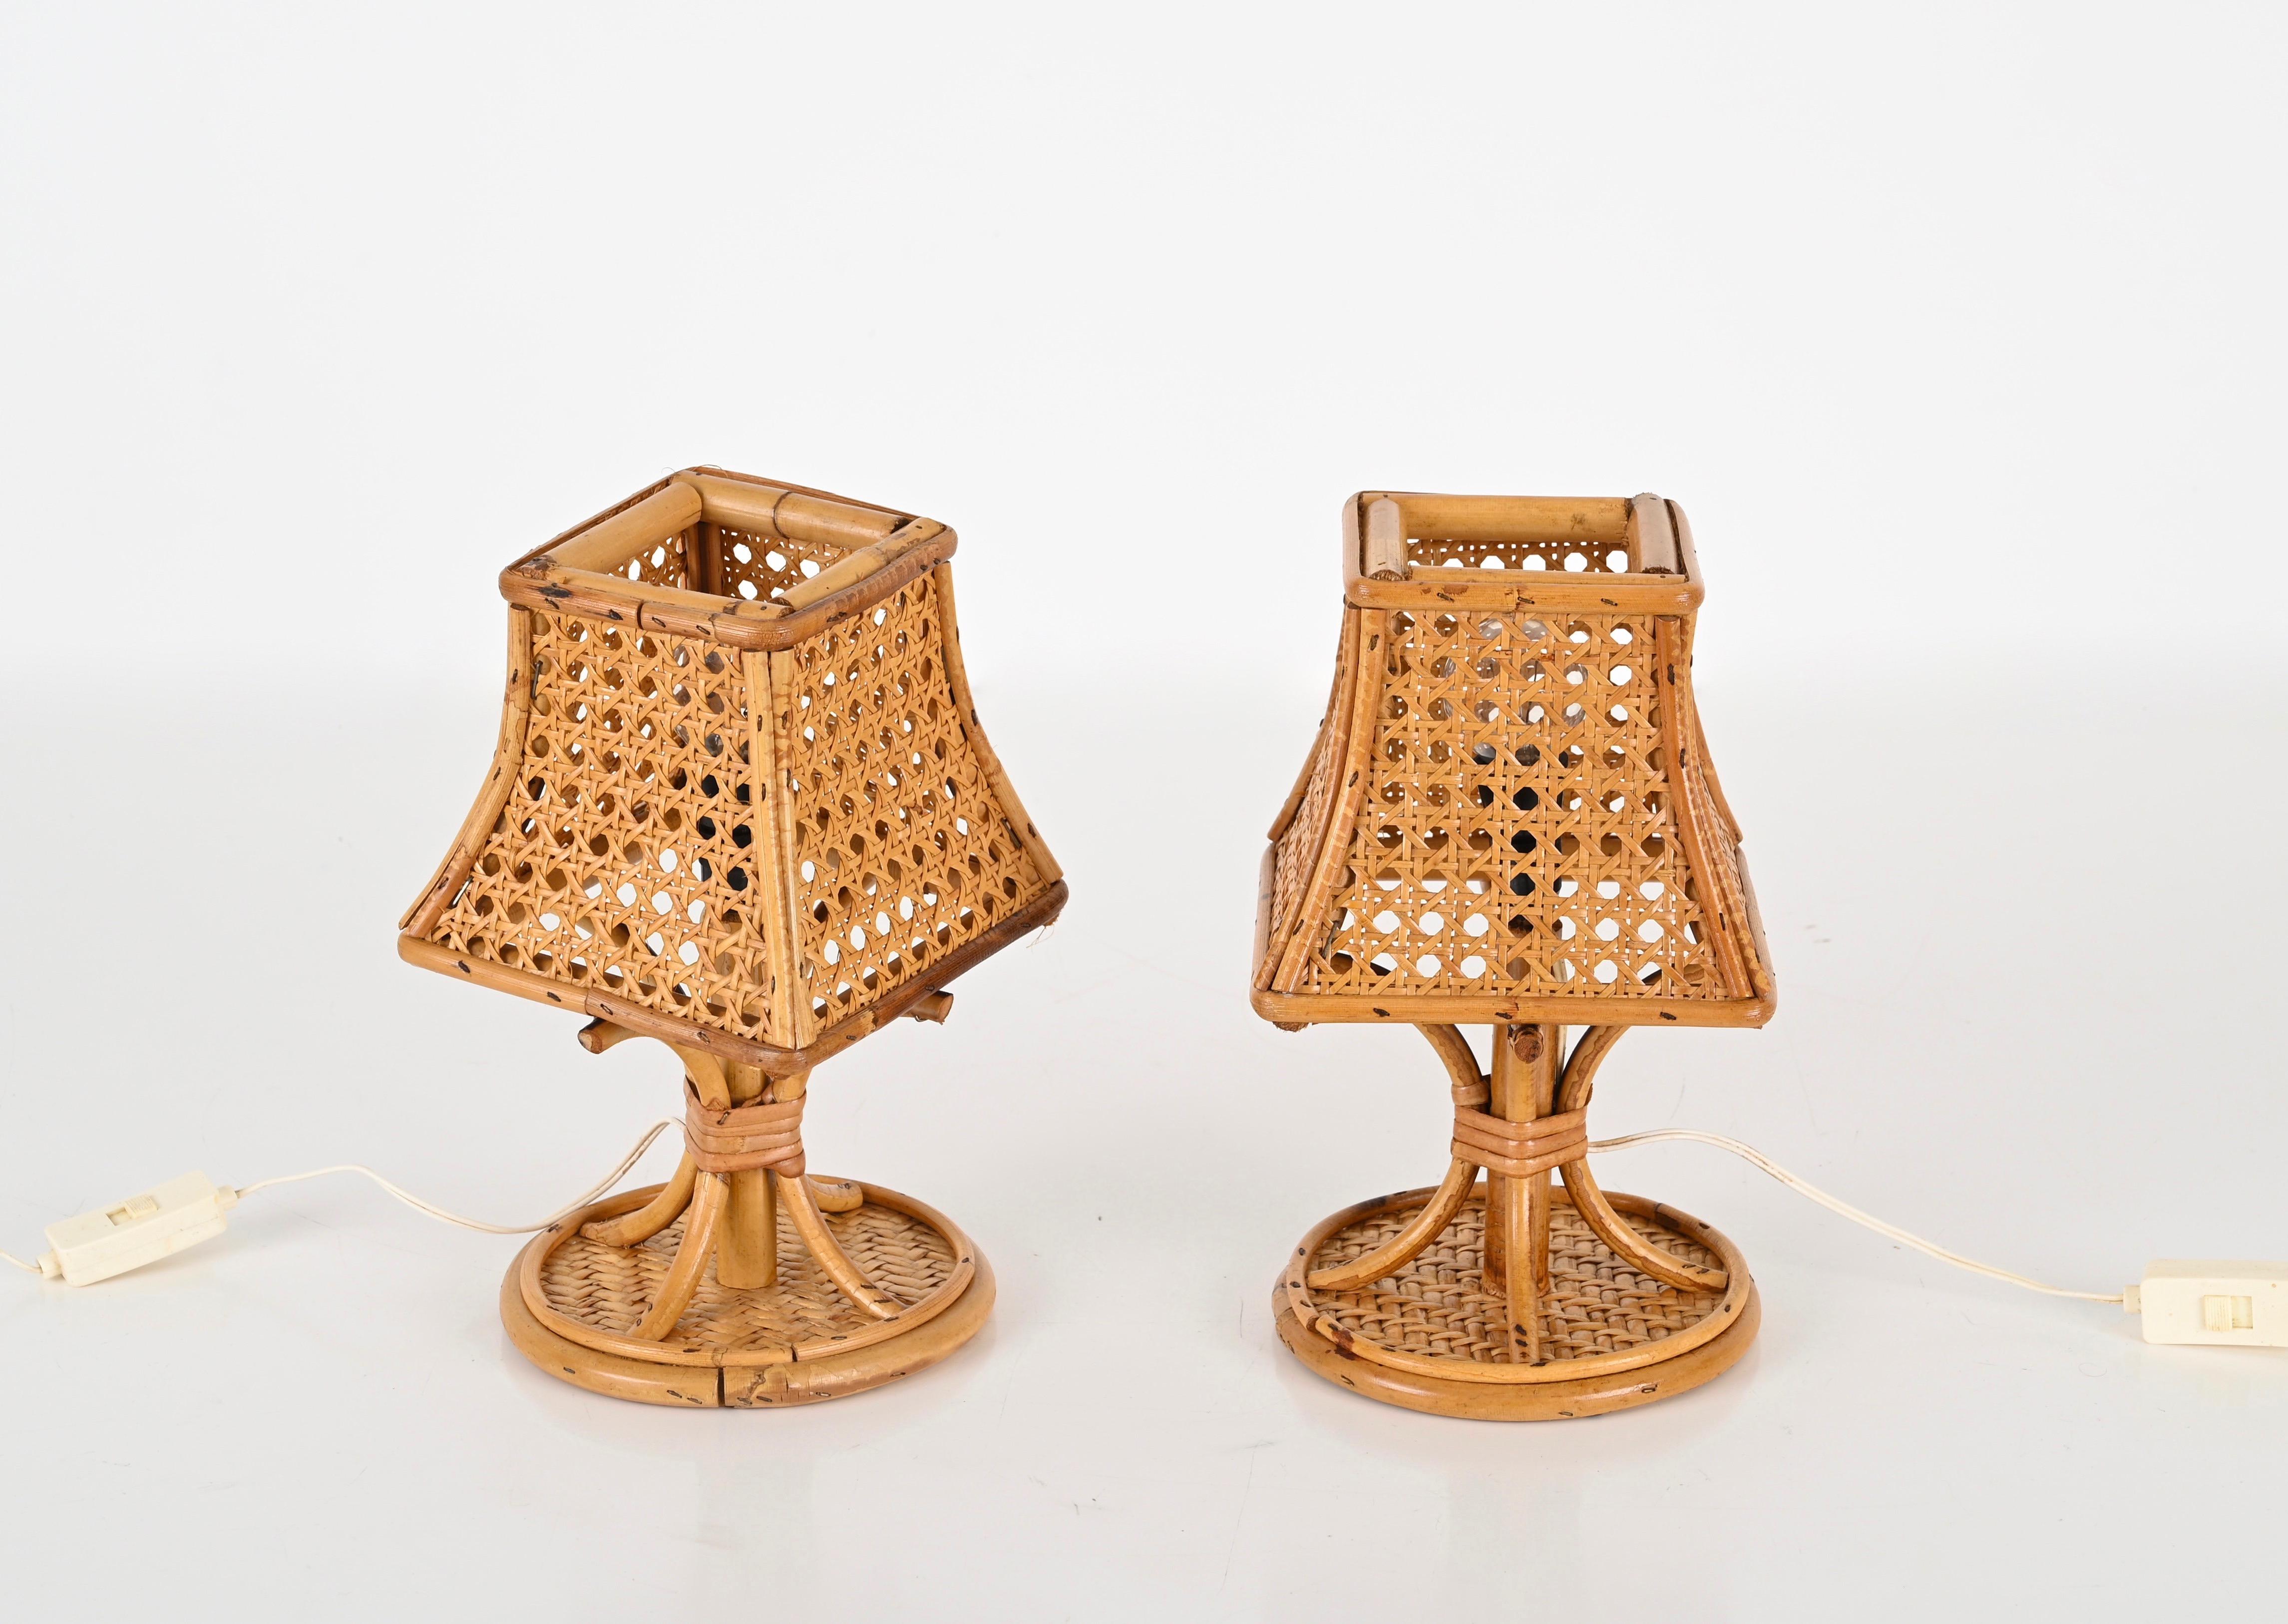 Pair of Mid-Century Italian Table Lamps in Rattan and Vienna Straw, 1960s For Sale 3